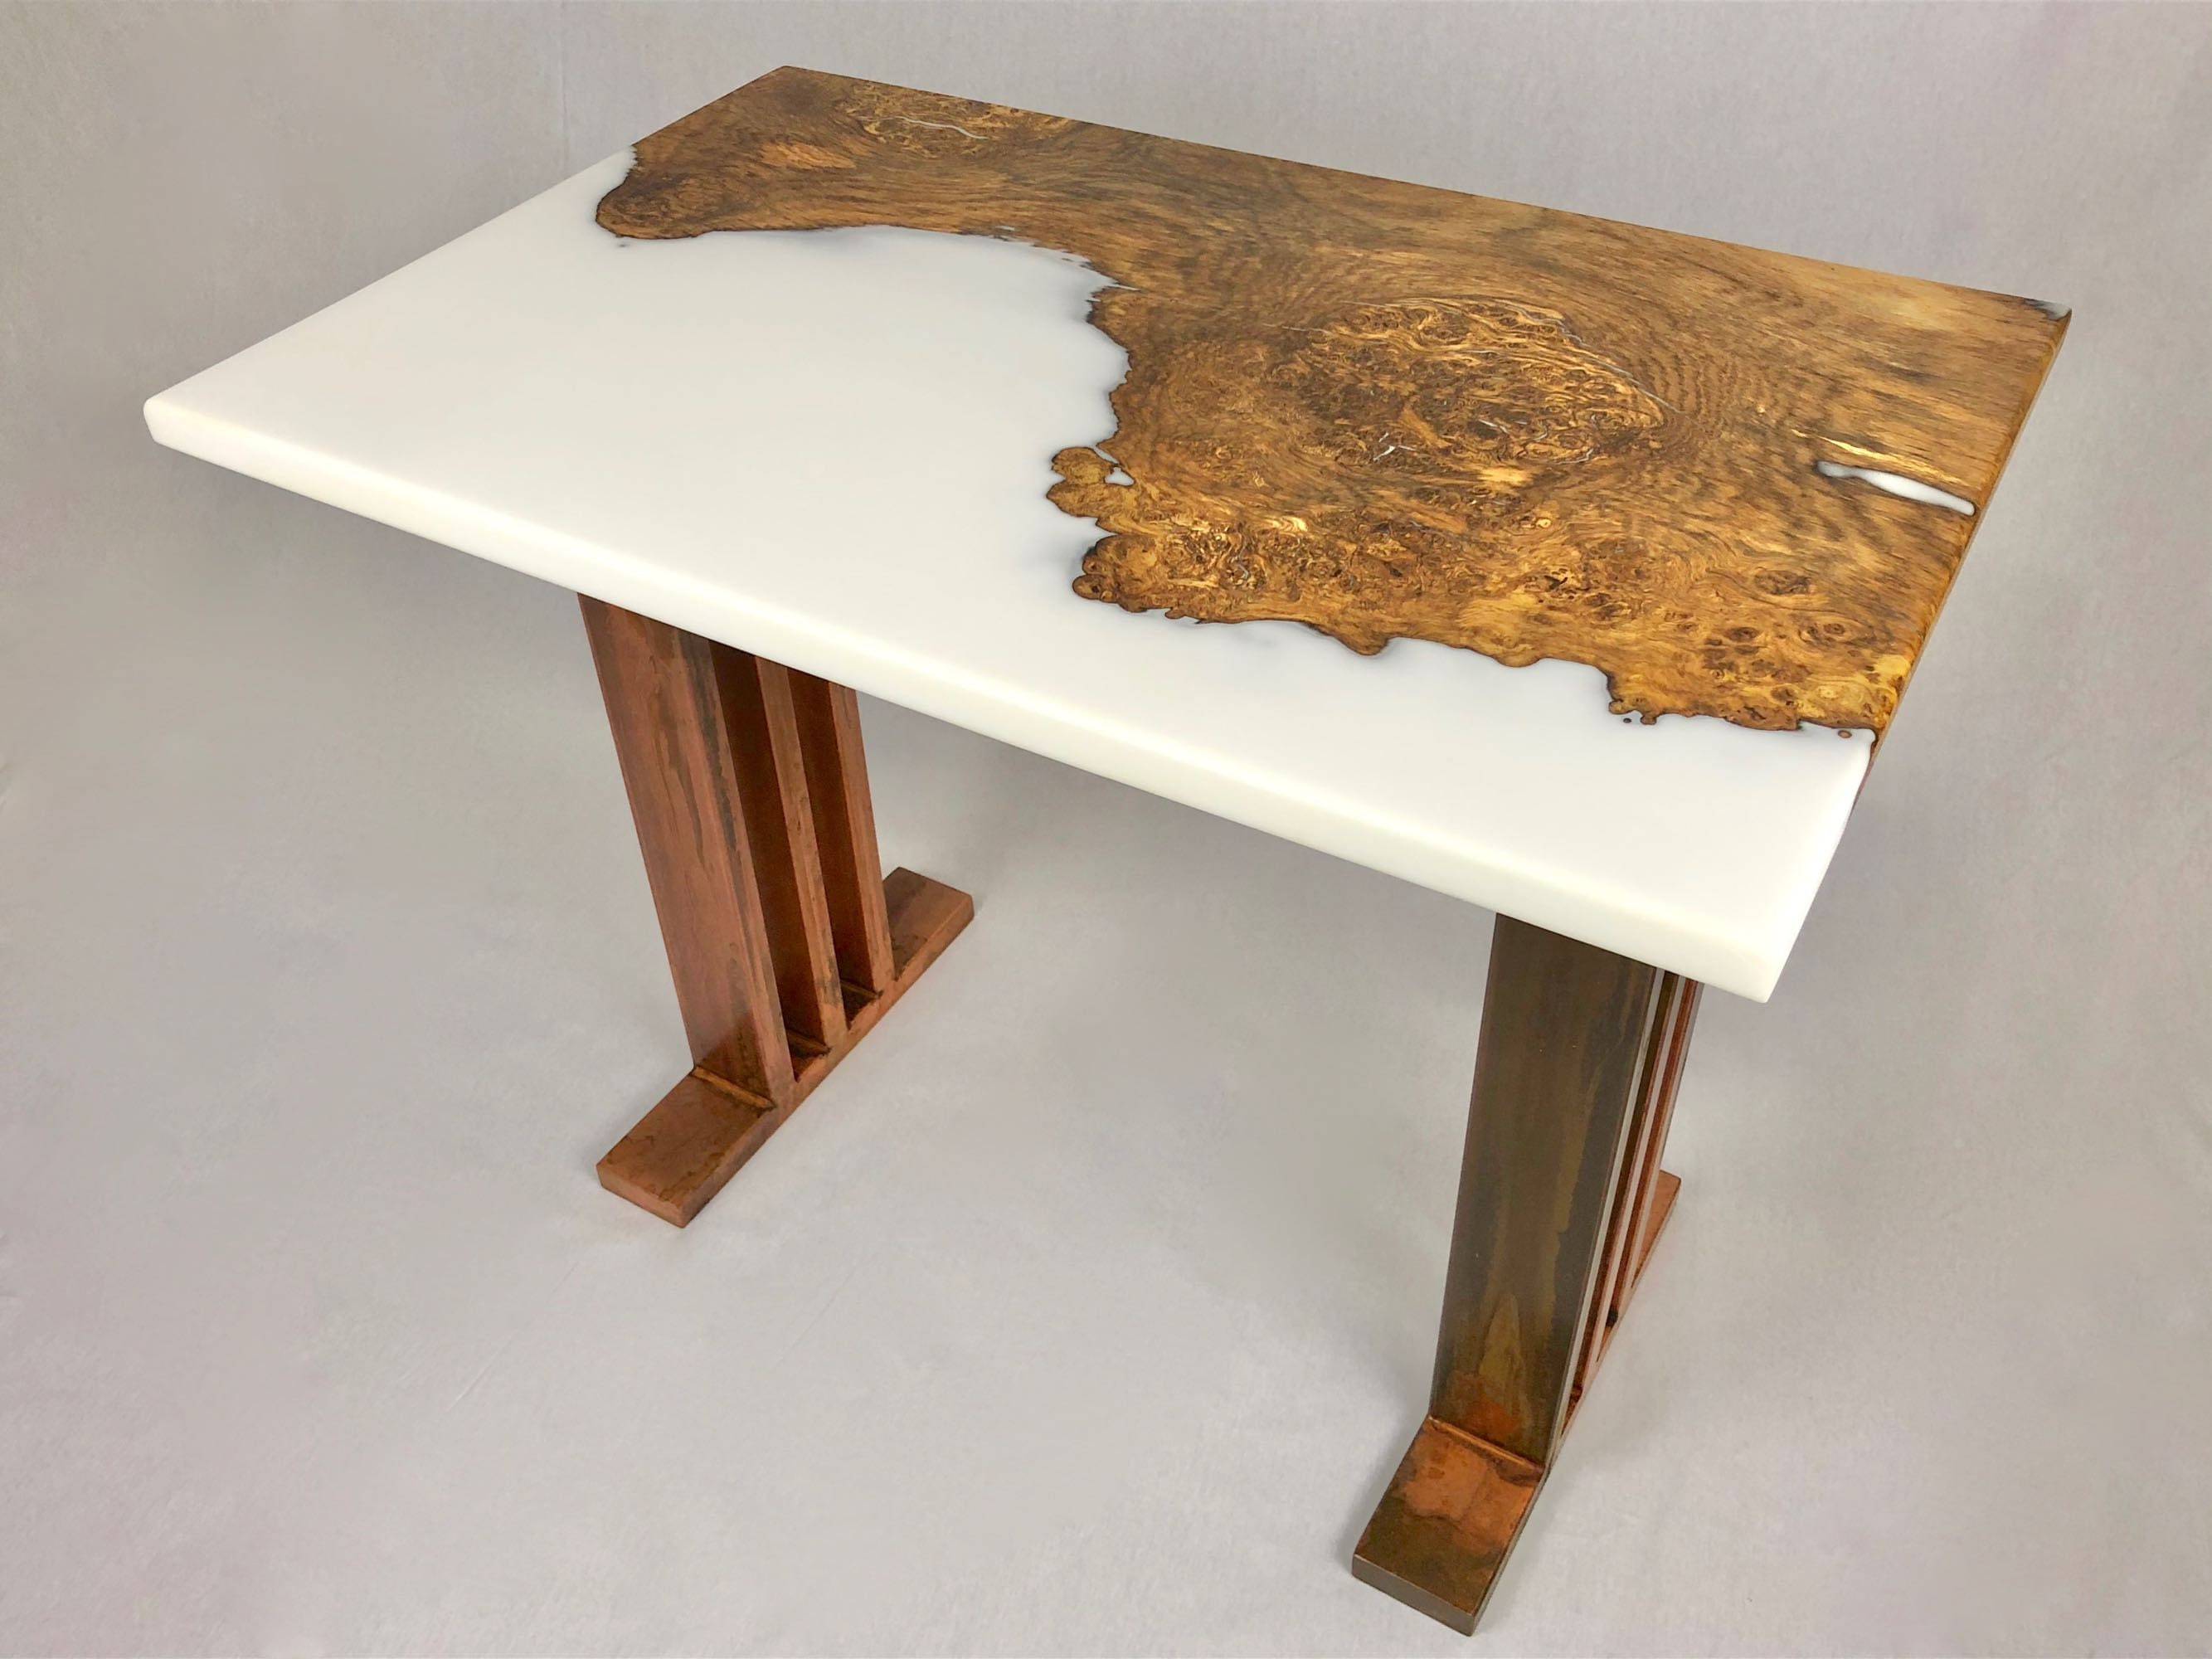 Resin Table Coffee, How To Make A Live Edge Resin Coffee Table